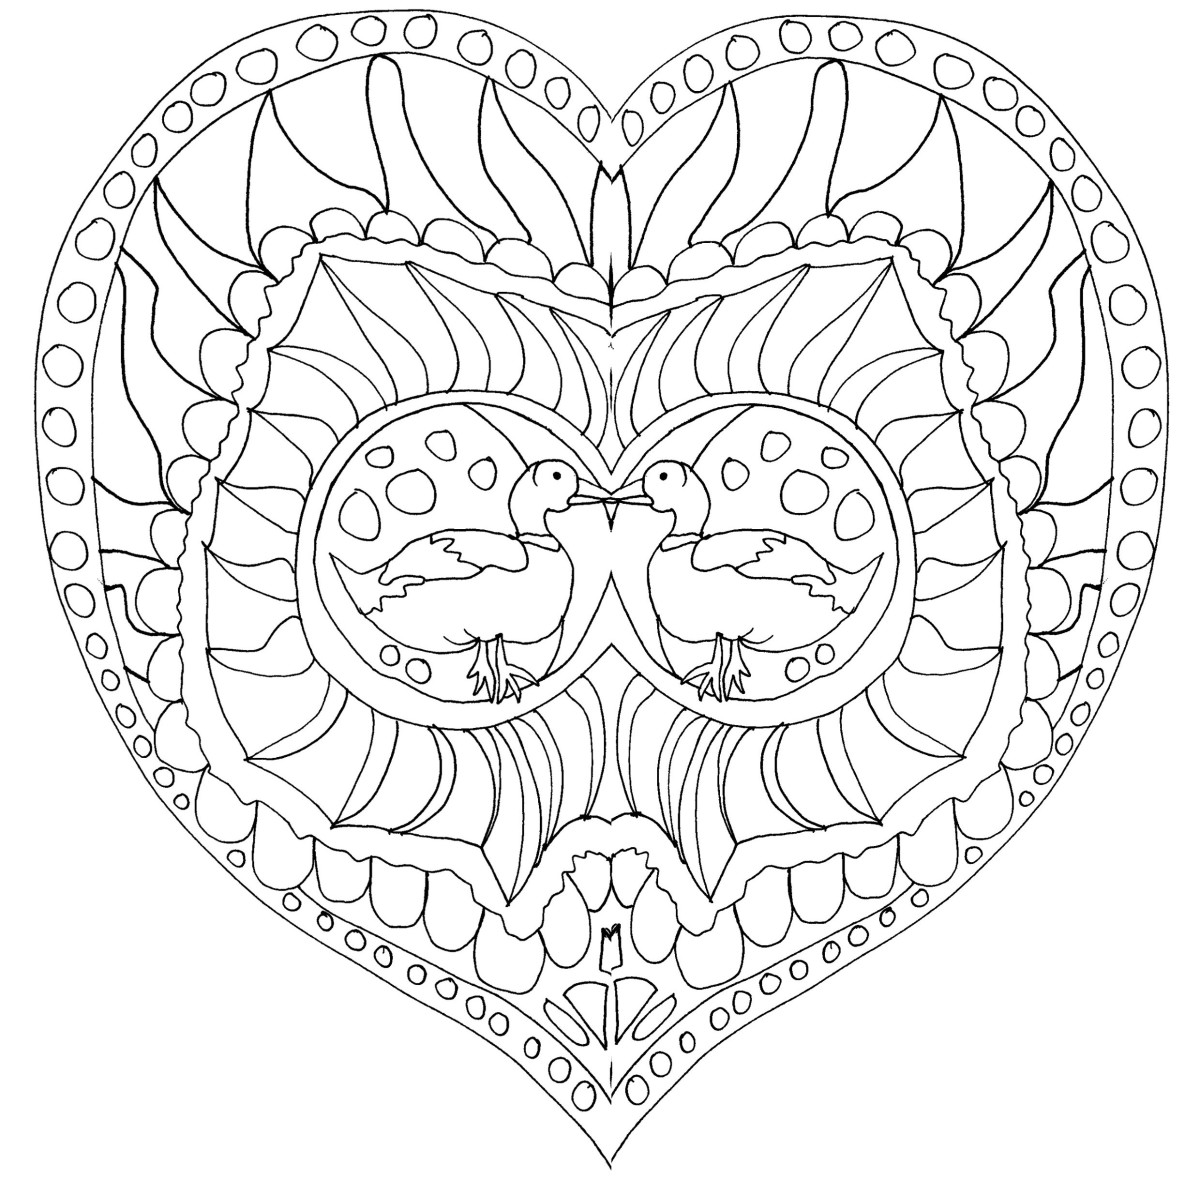 Free printable adult coloring pages featuring animals